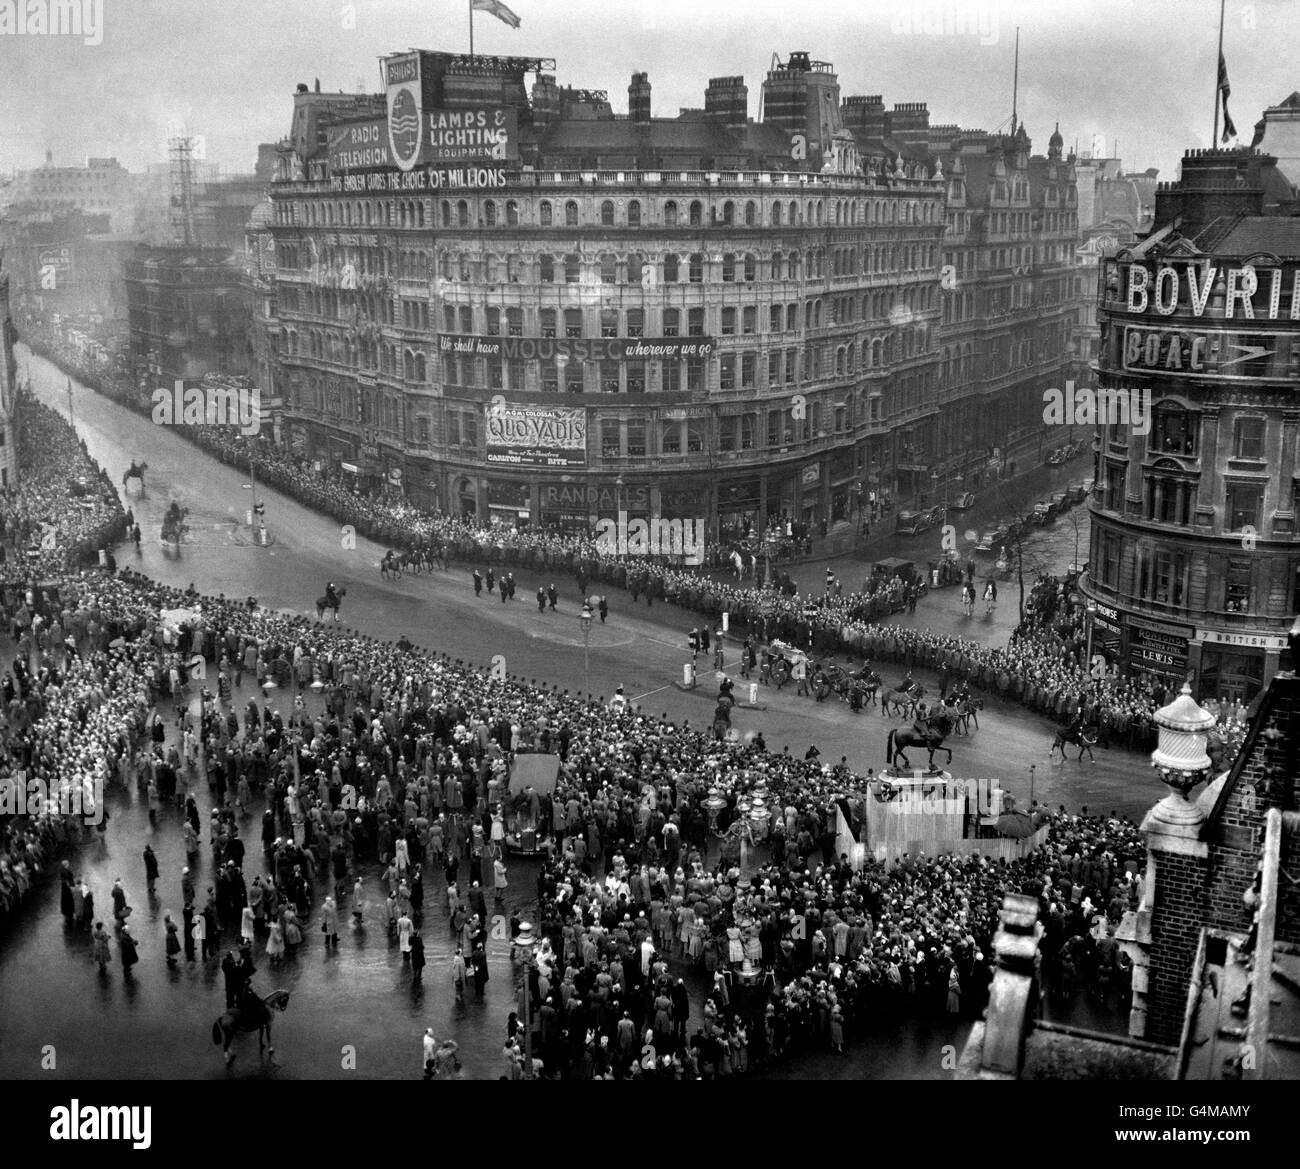 The cortege of the coffin of King George VI passing through the crowd in Trafalgar Square on it's way to Westminster Hall to lie in state. Stock Photo